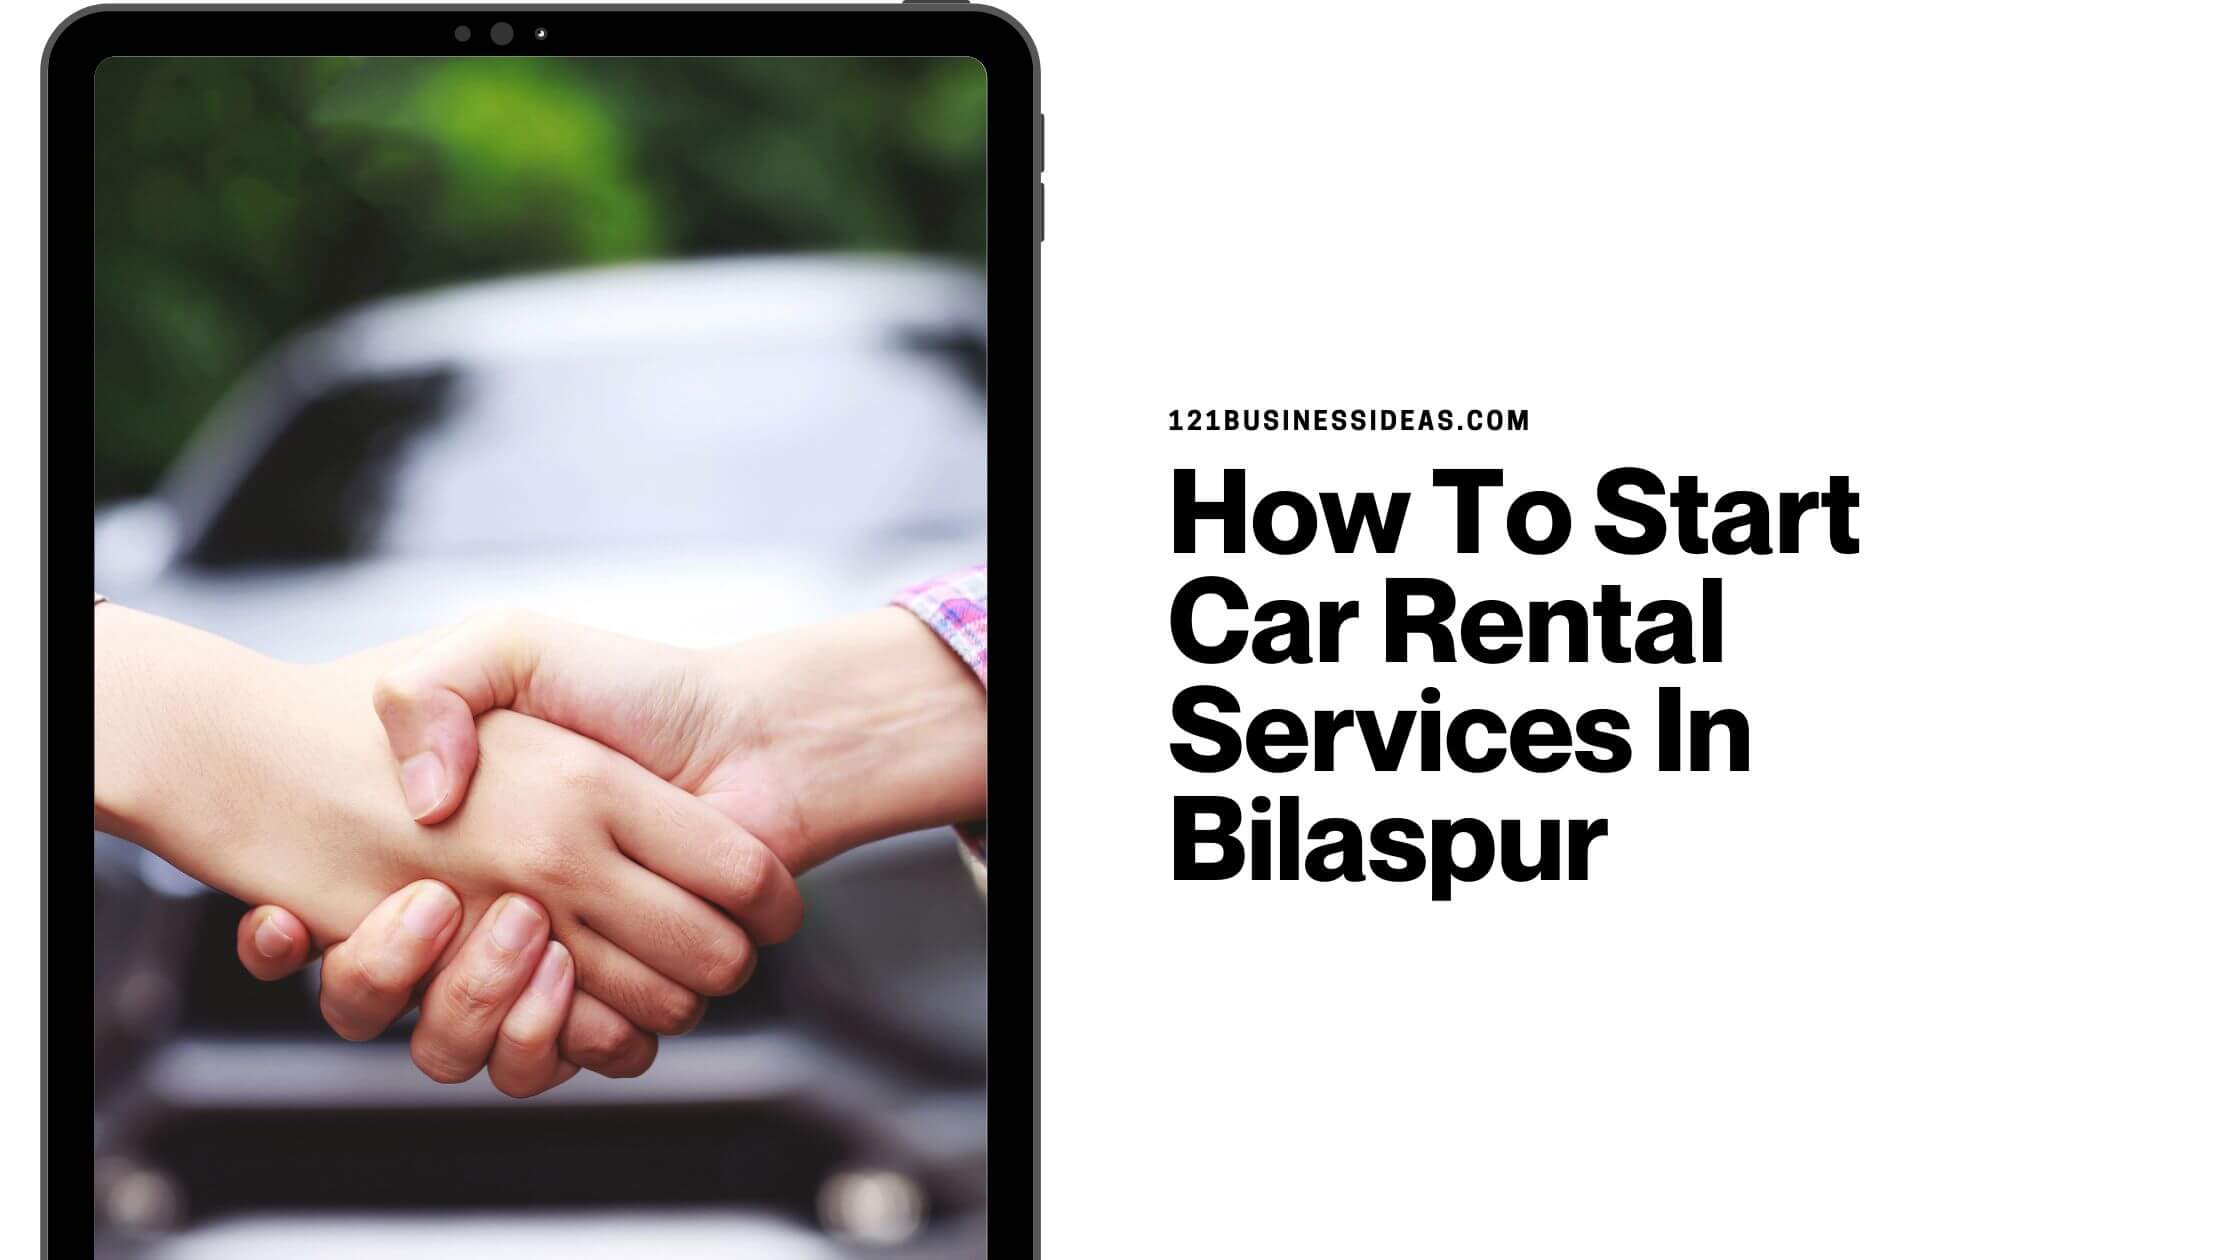 How To Start Car Rental Services In Bilaspur (1)